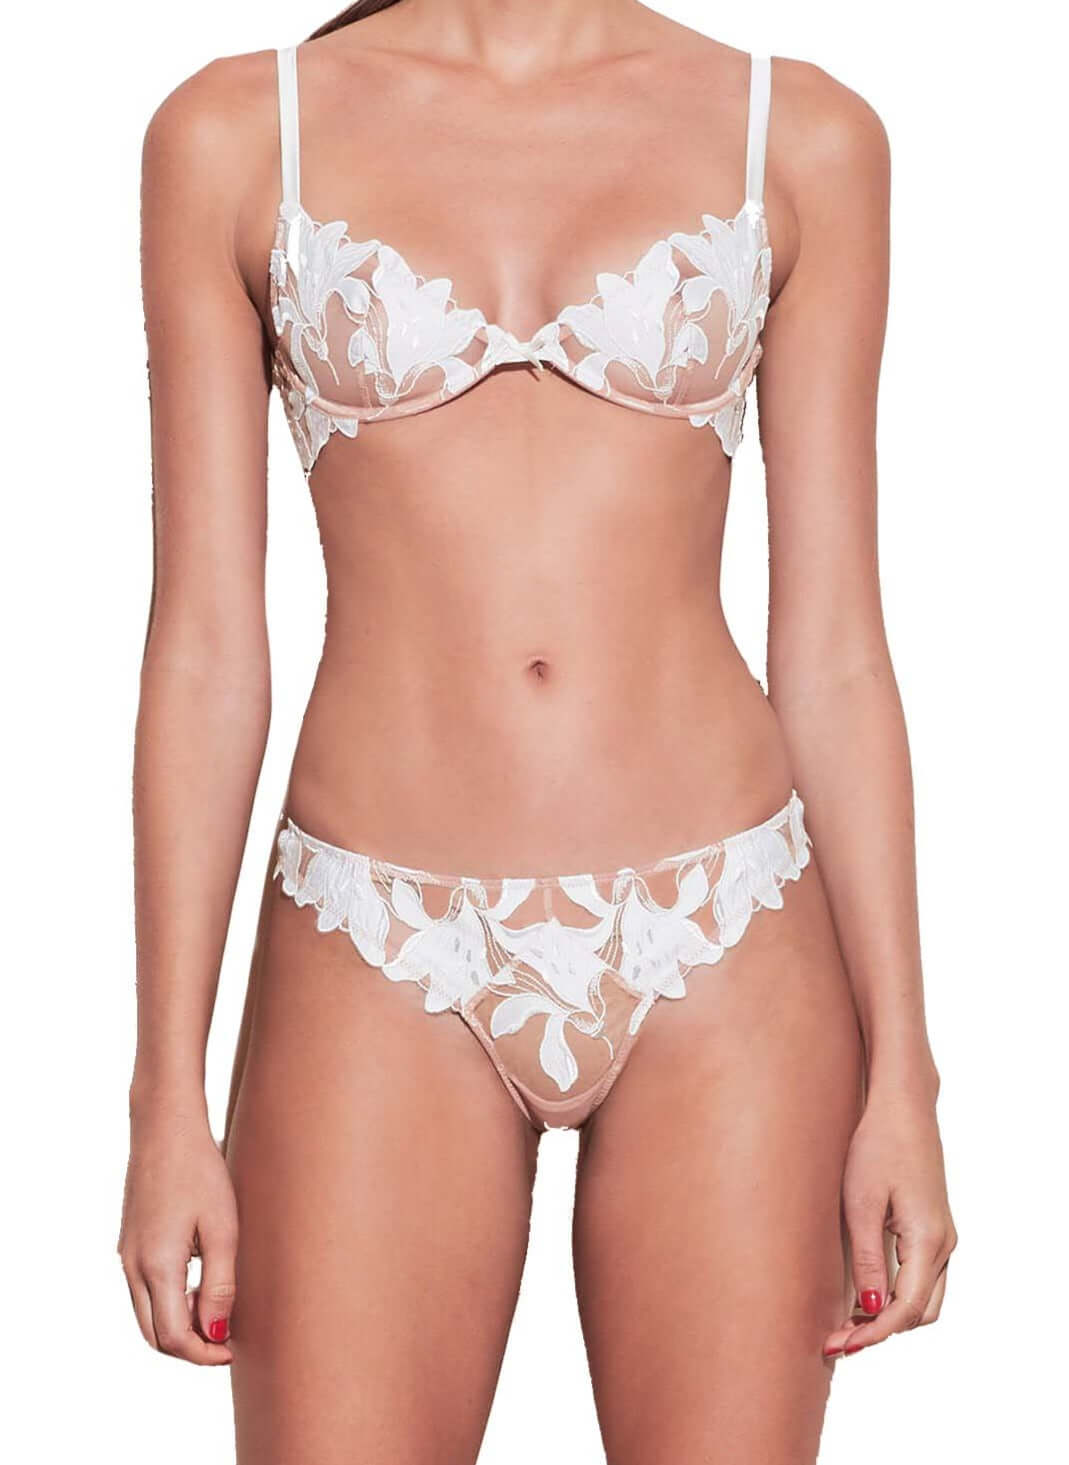 Fleur Du Mal Lily Embroidered Plunge Demi Bra in Ivory Size: 32B  at Petticoat Lane  Greenwich, CT